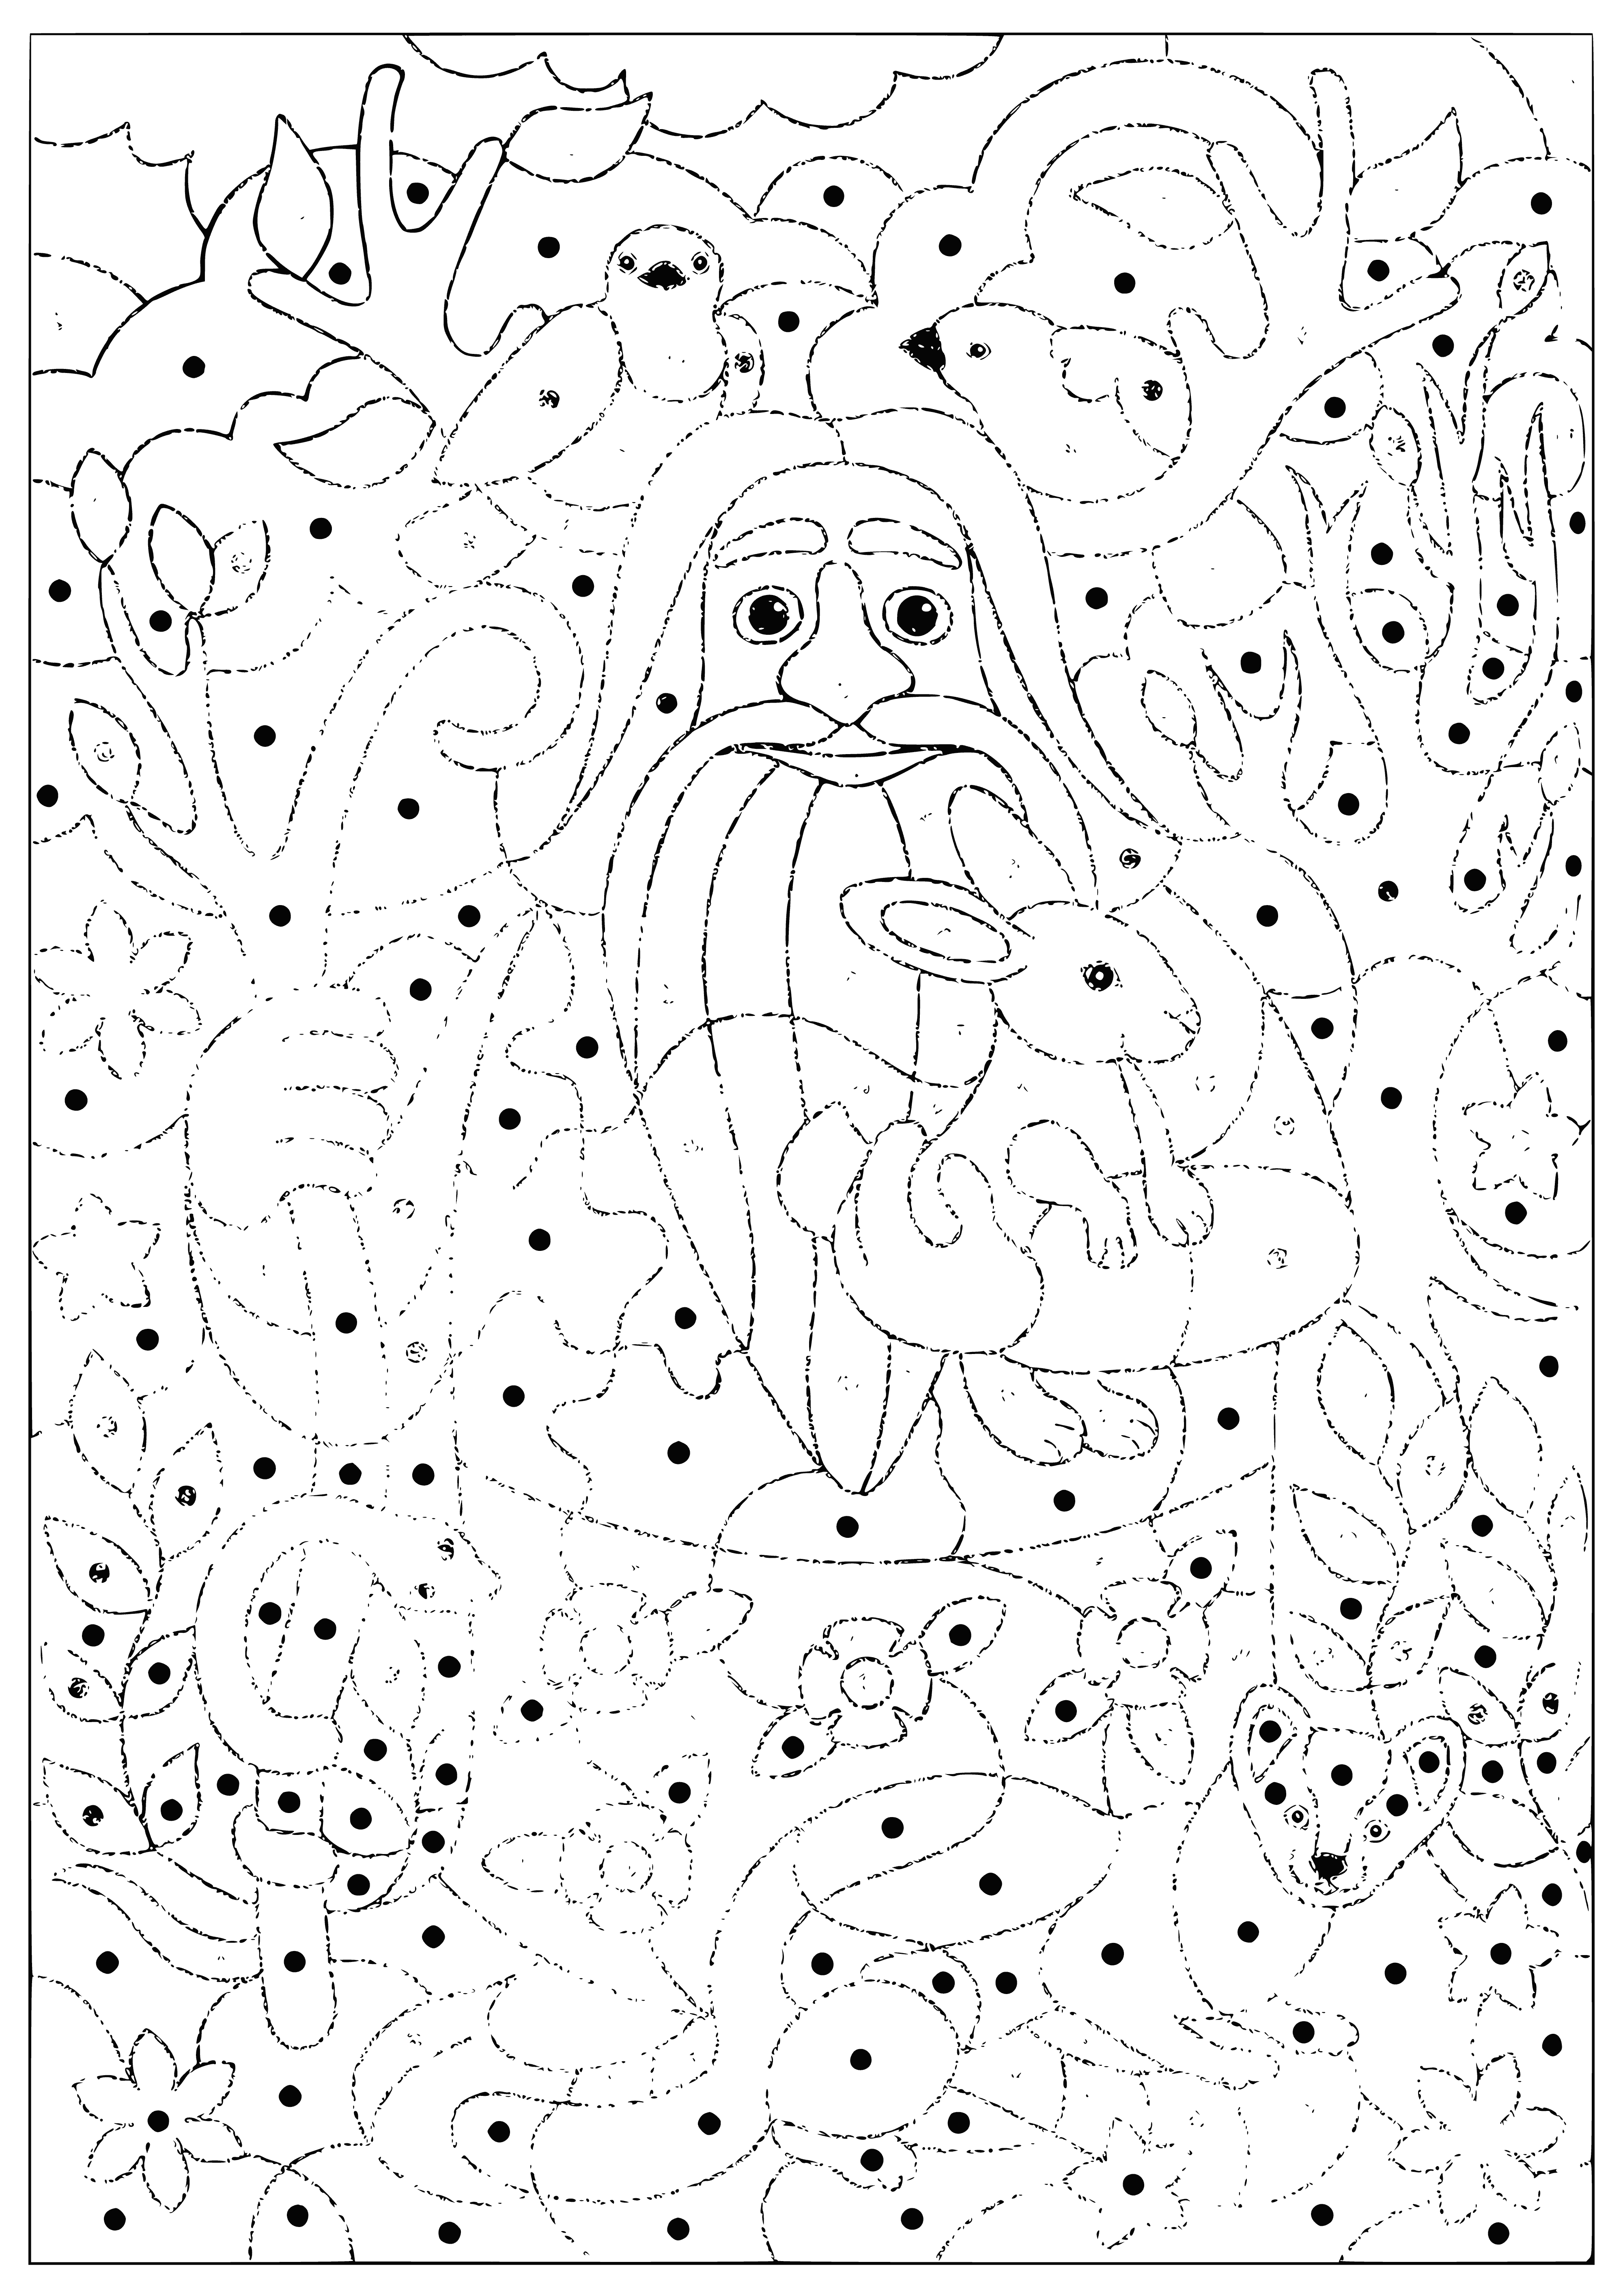 coloring page: A figure atop a tree overlooking a colorful forest sky full of stars. Flowers dot the ground below, inviting exploration.